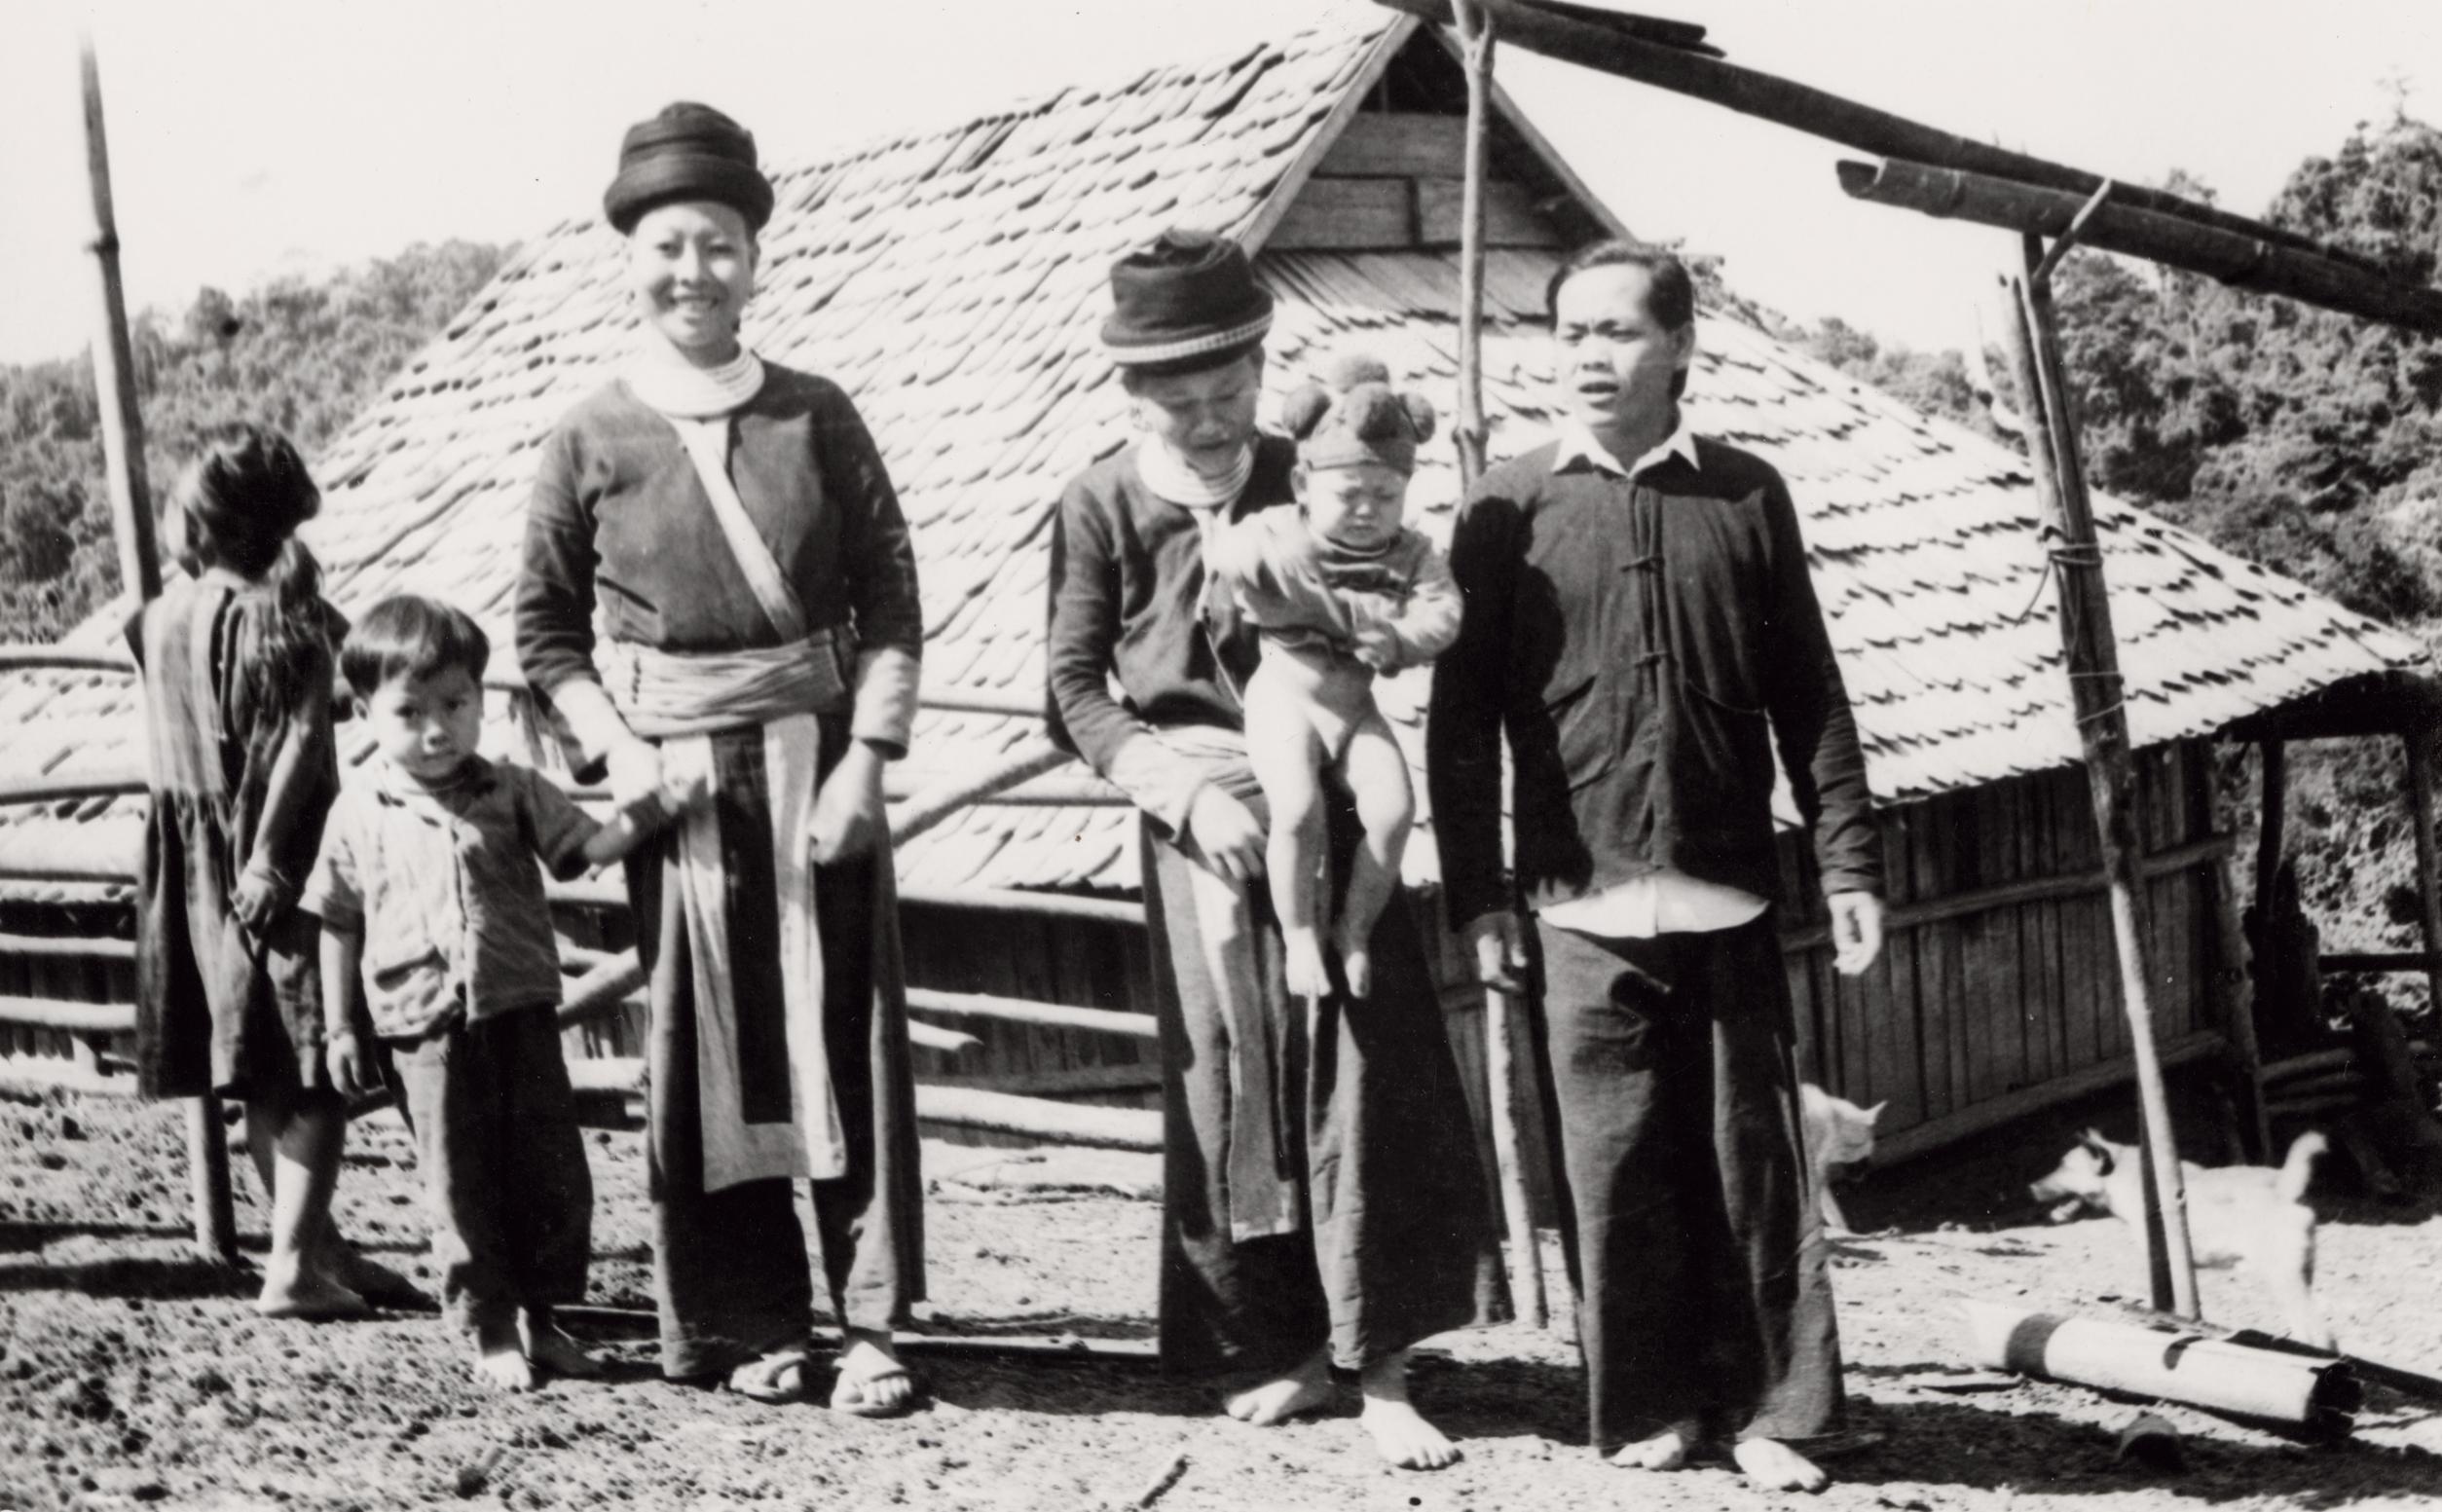 Quan family ties – Friends of China Camp